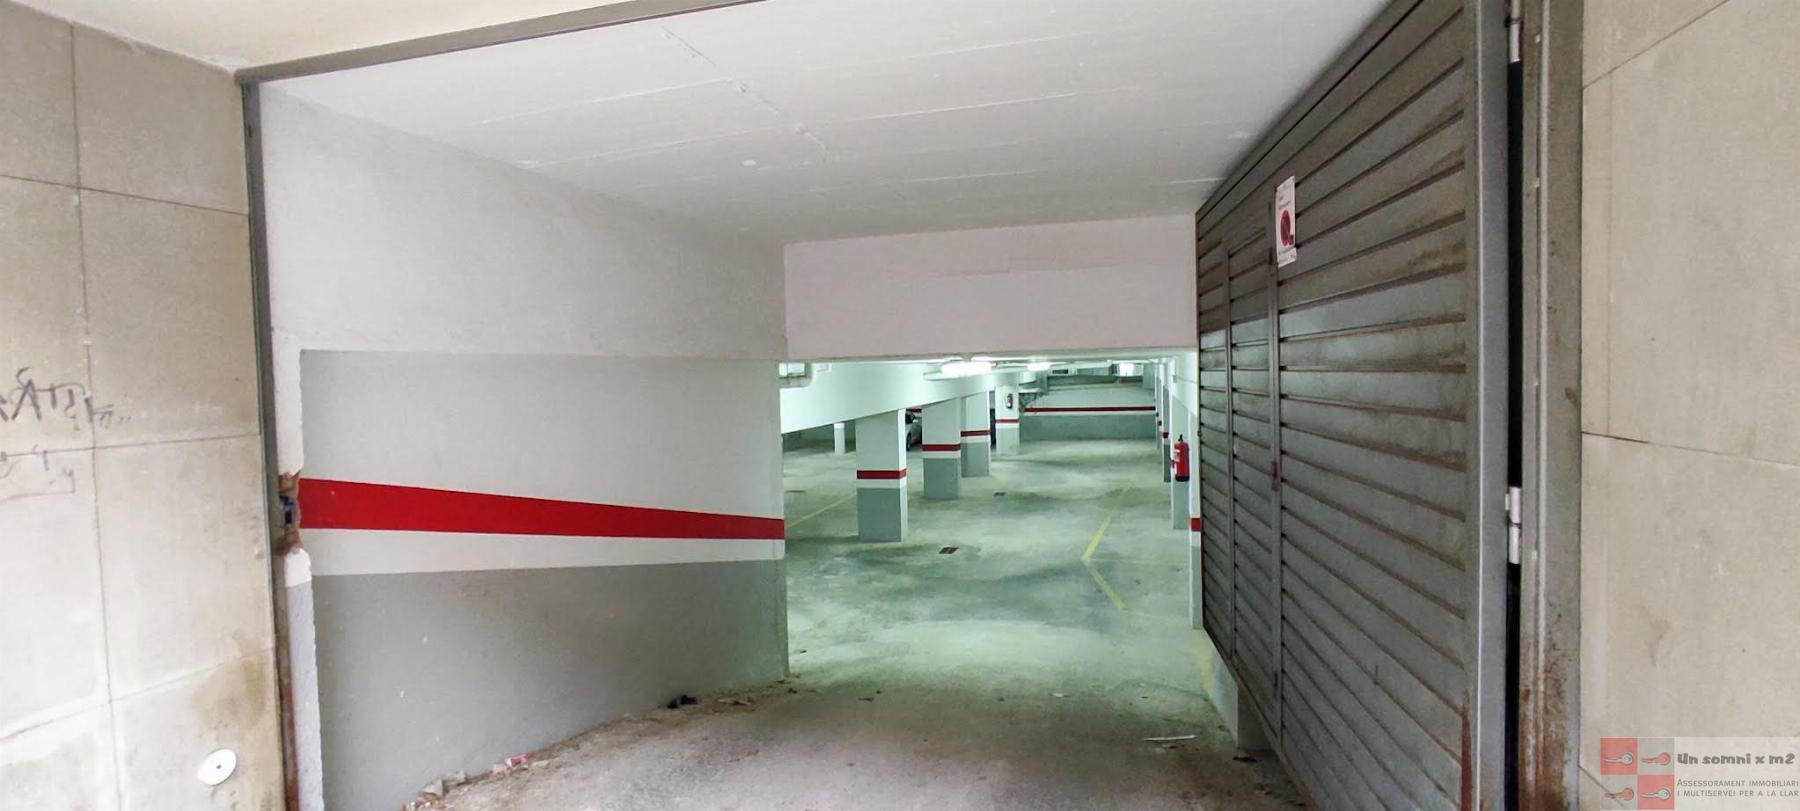 For sale of garage in Igualada